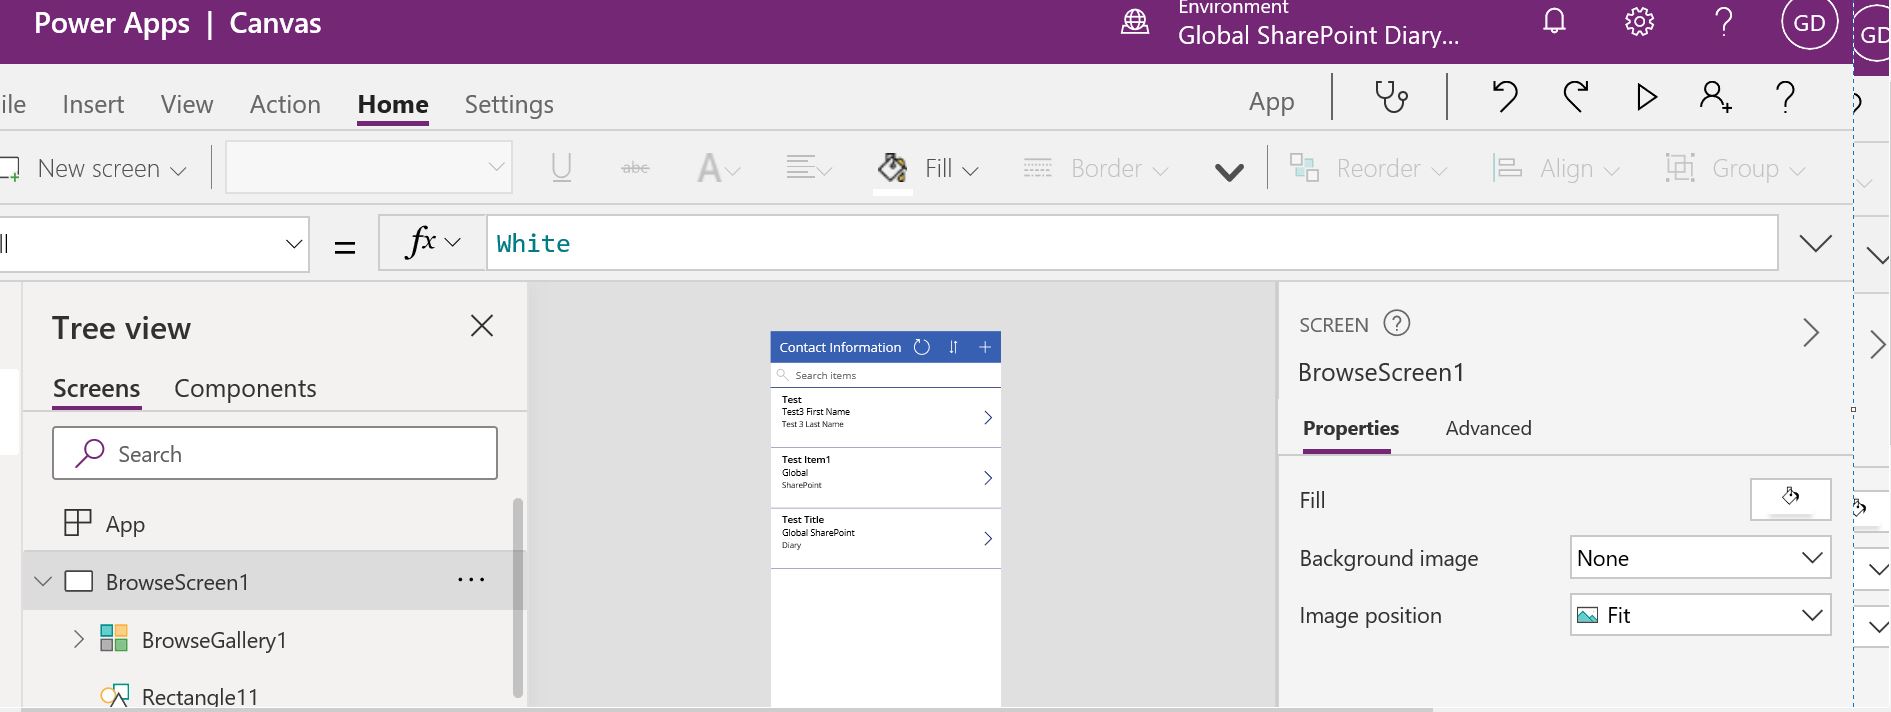 SharePoint Online list is opened in PowerApps designer